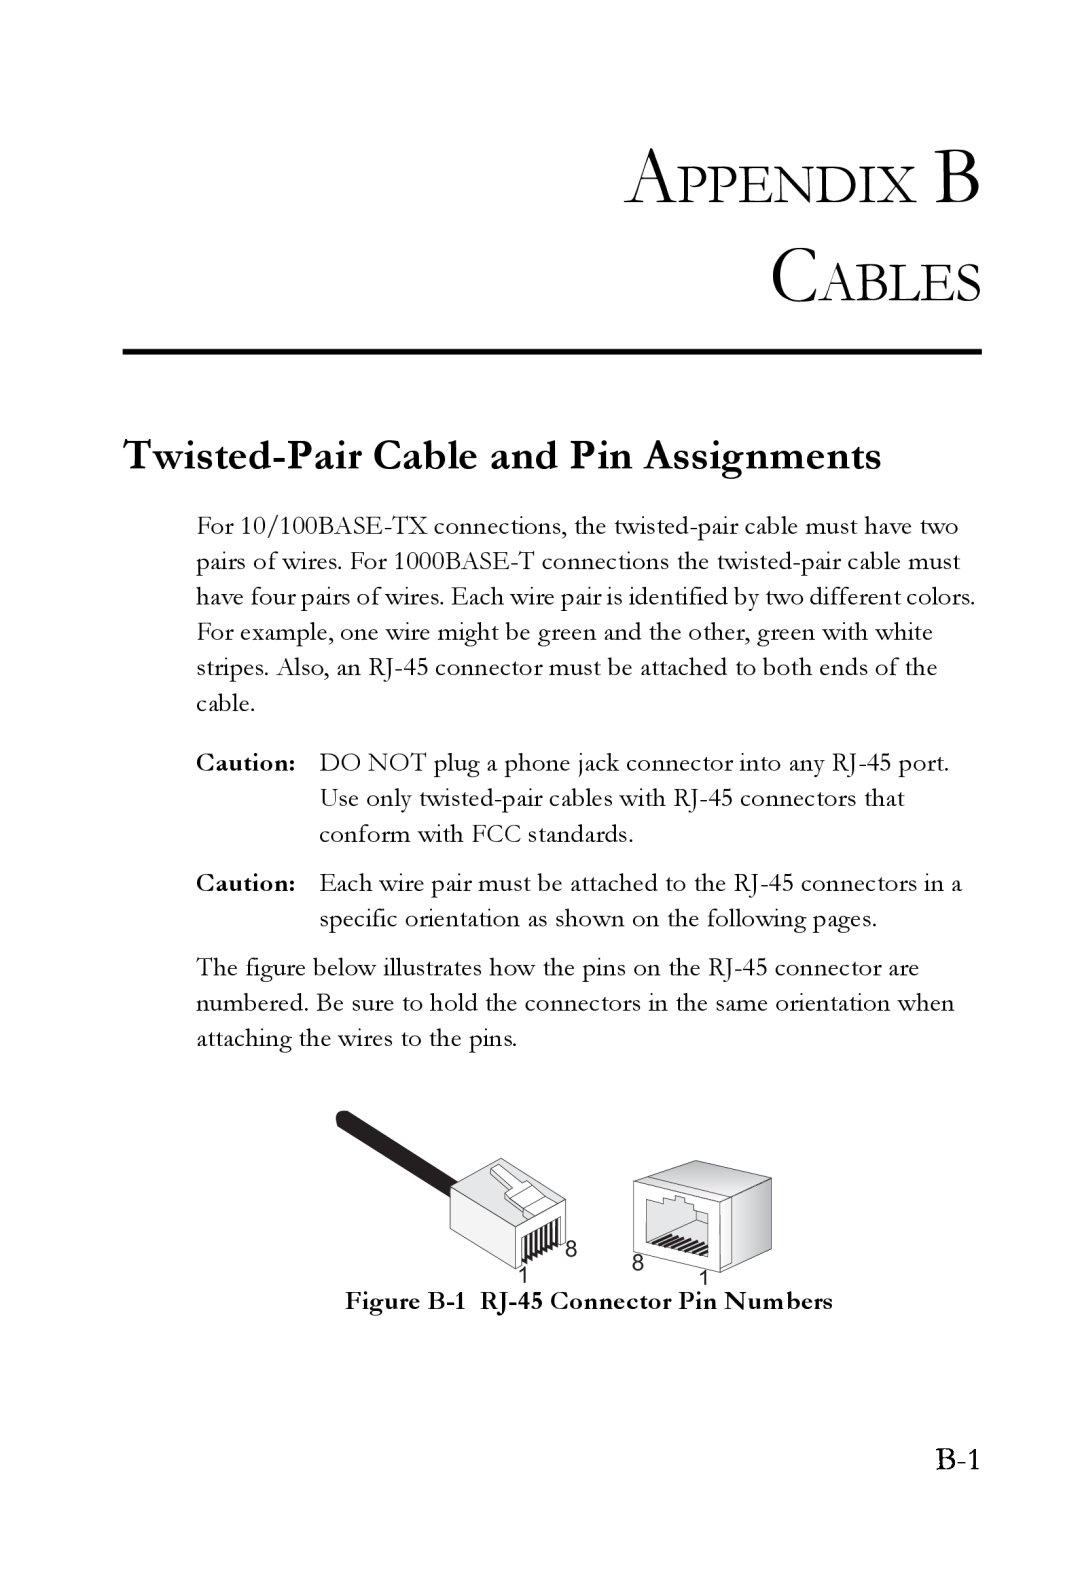 SMC Networks SMC7824M/FSW manual Appendix B Cables, Twisted-Pair Cable and Pin Assignments 